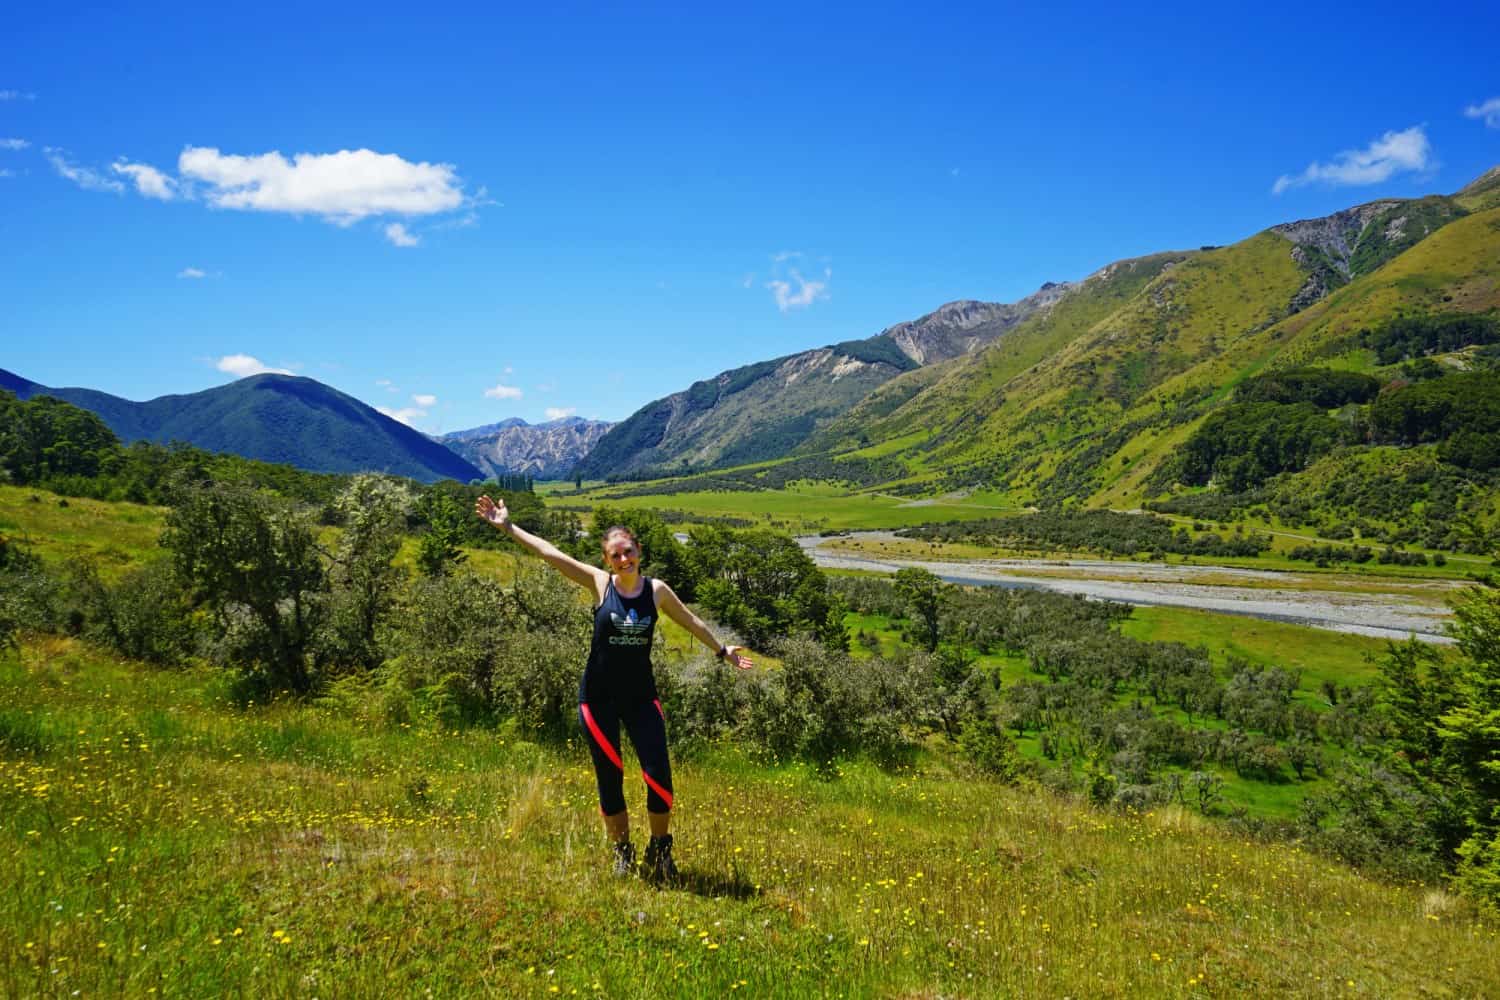 Author in hiking attire on a hillside in New Zealand, with a braided gravel river in the valley beyond and more large hills on the other side. Spring flowers are visible on the hills.